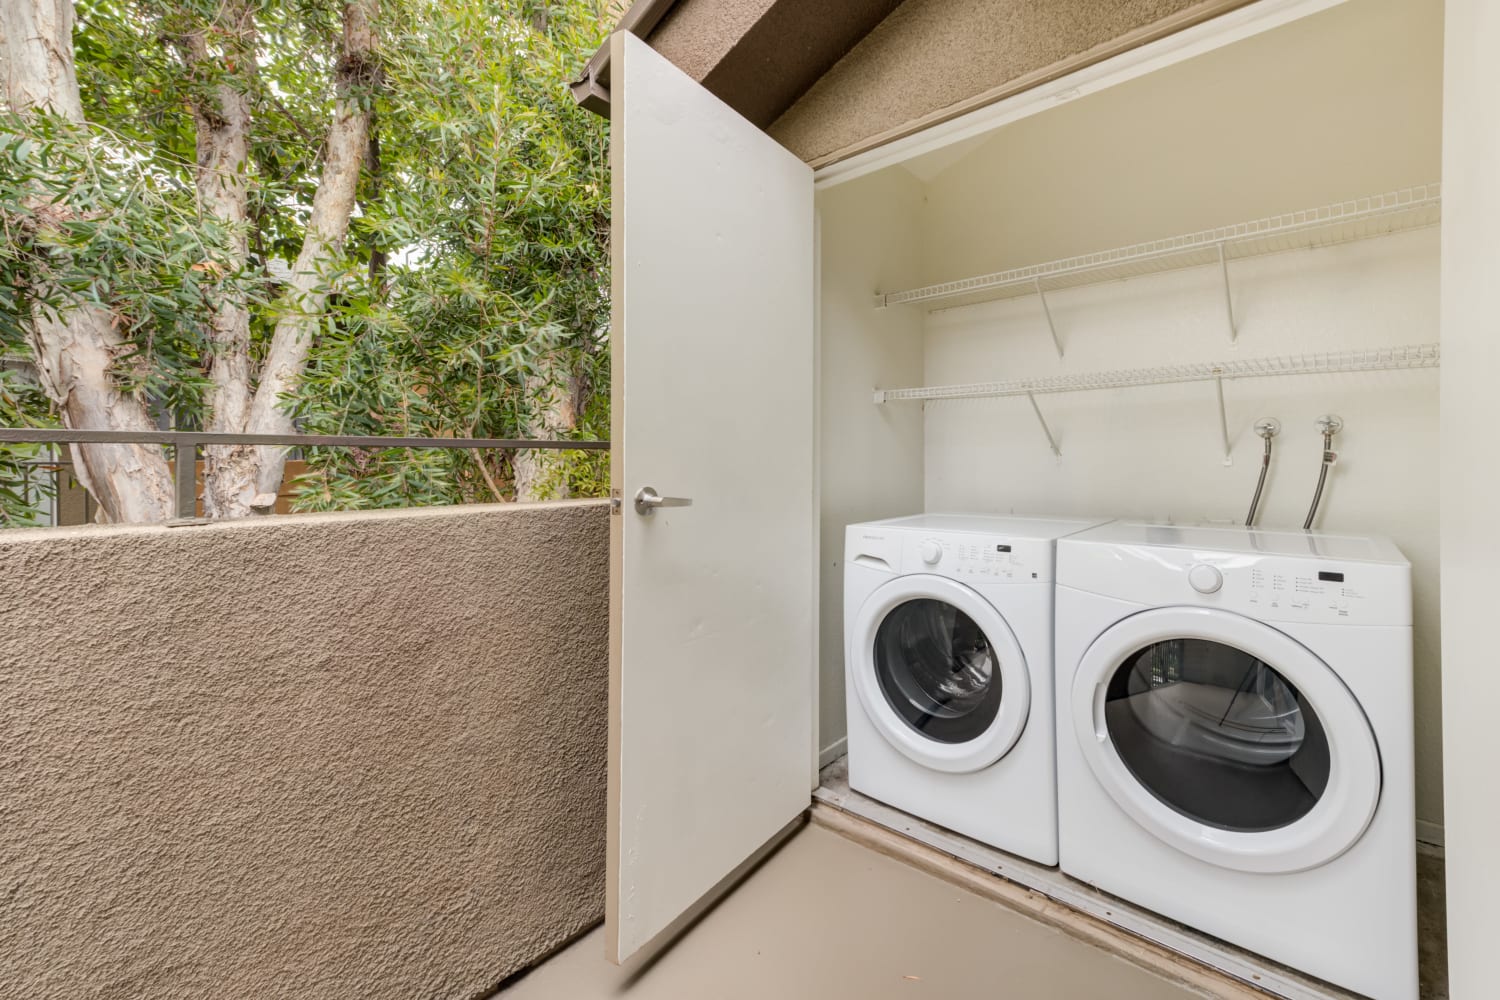 Easily accessible washer and dryer at Seapointe Villas in Costa Mesa, California